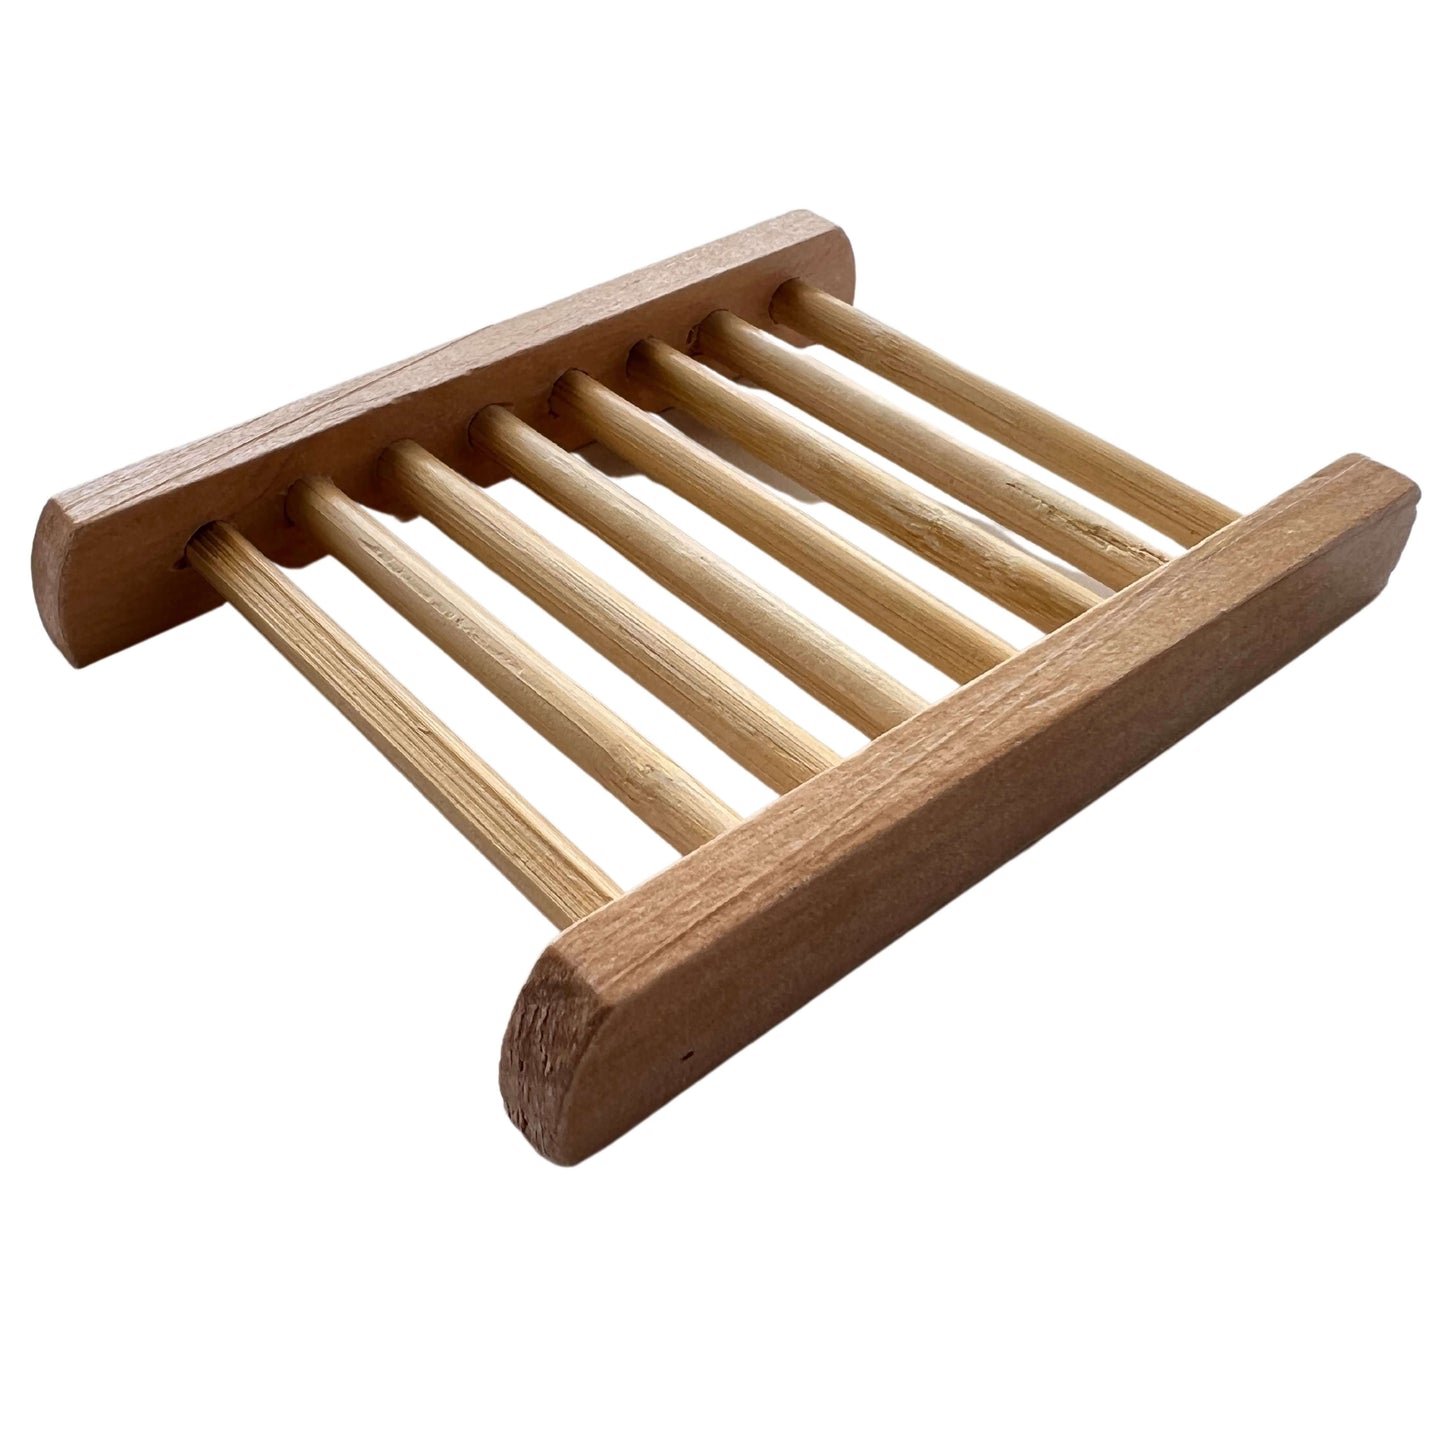 brush it on bamboo soap dish ladder made from sustainable bamboo and can be composted at end of its life